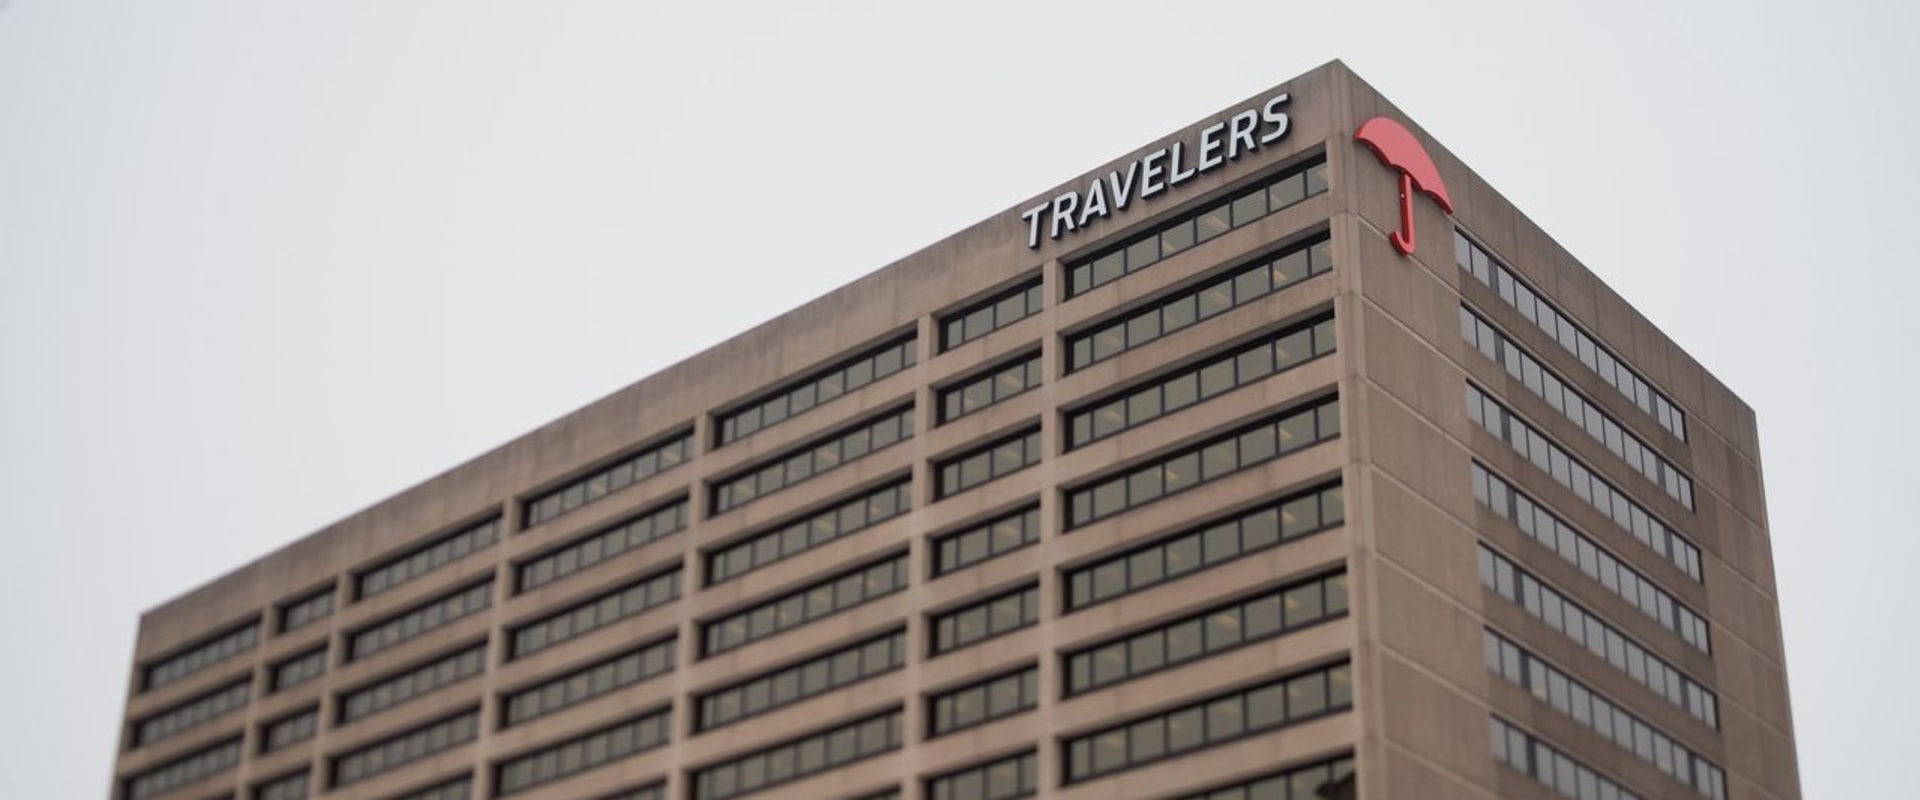 Has Travelers Insurance Been Bought Out?